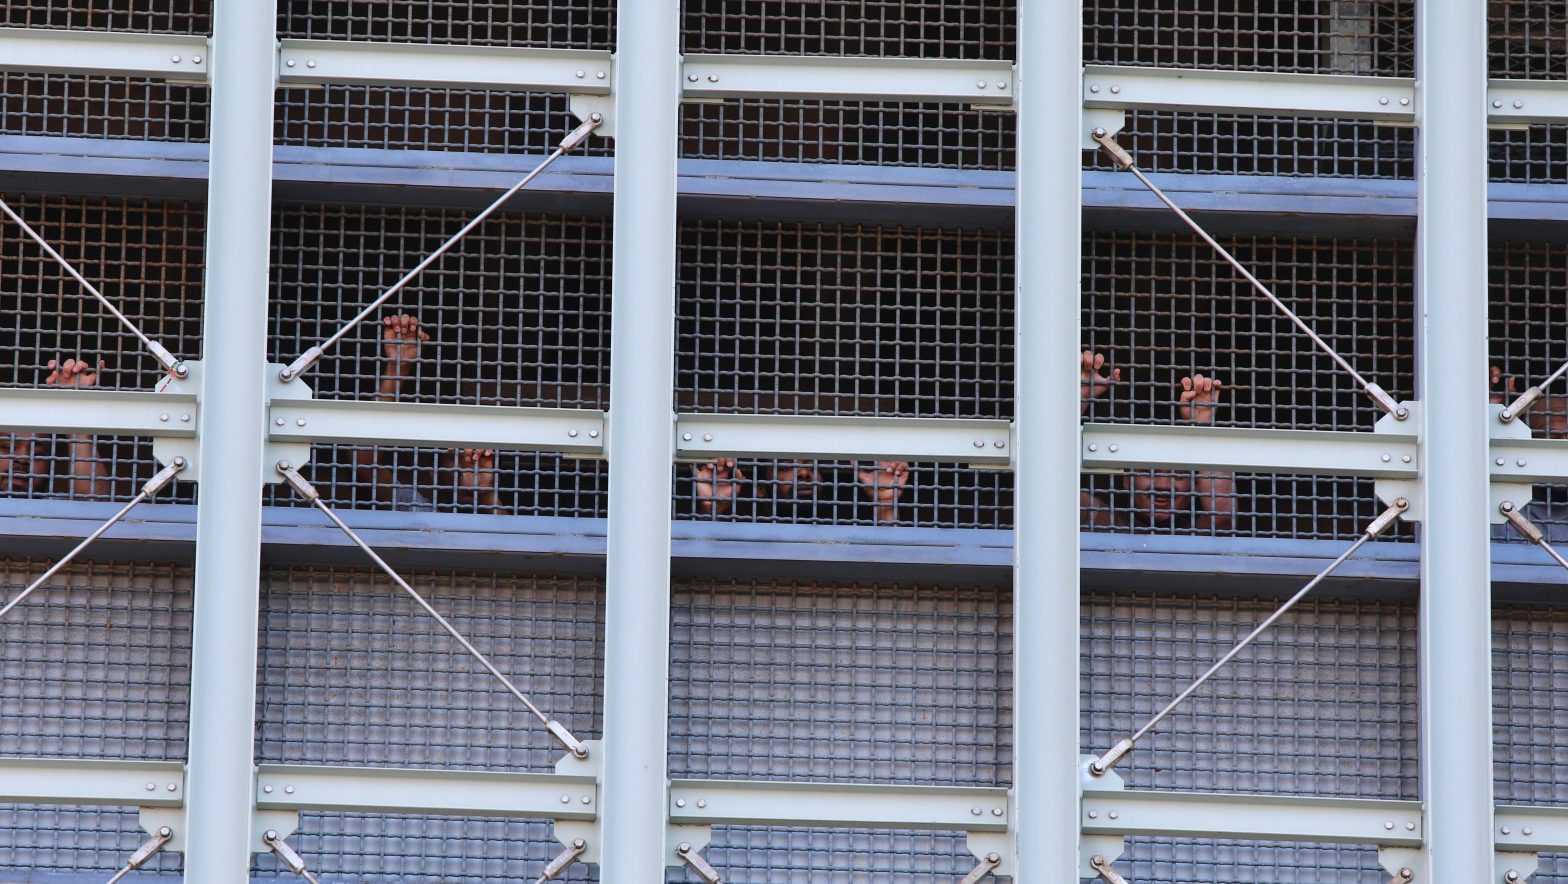 Inmates inside the Metropolitan Detention Center looking out. News - Judge Furman blocks sending convicted drug offender to problematic Metropolitan Detention Center